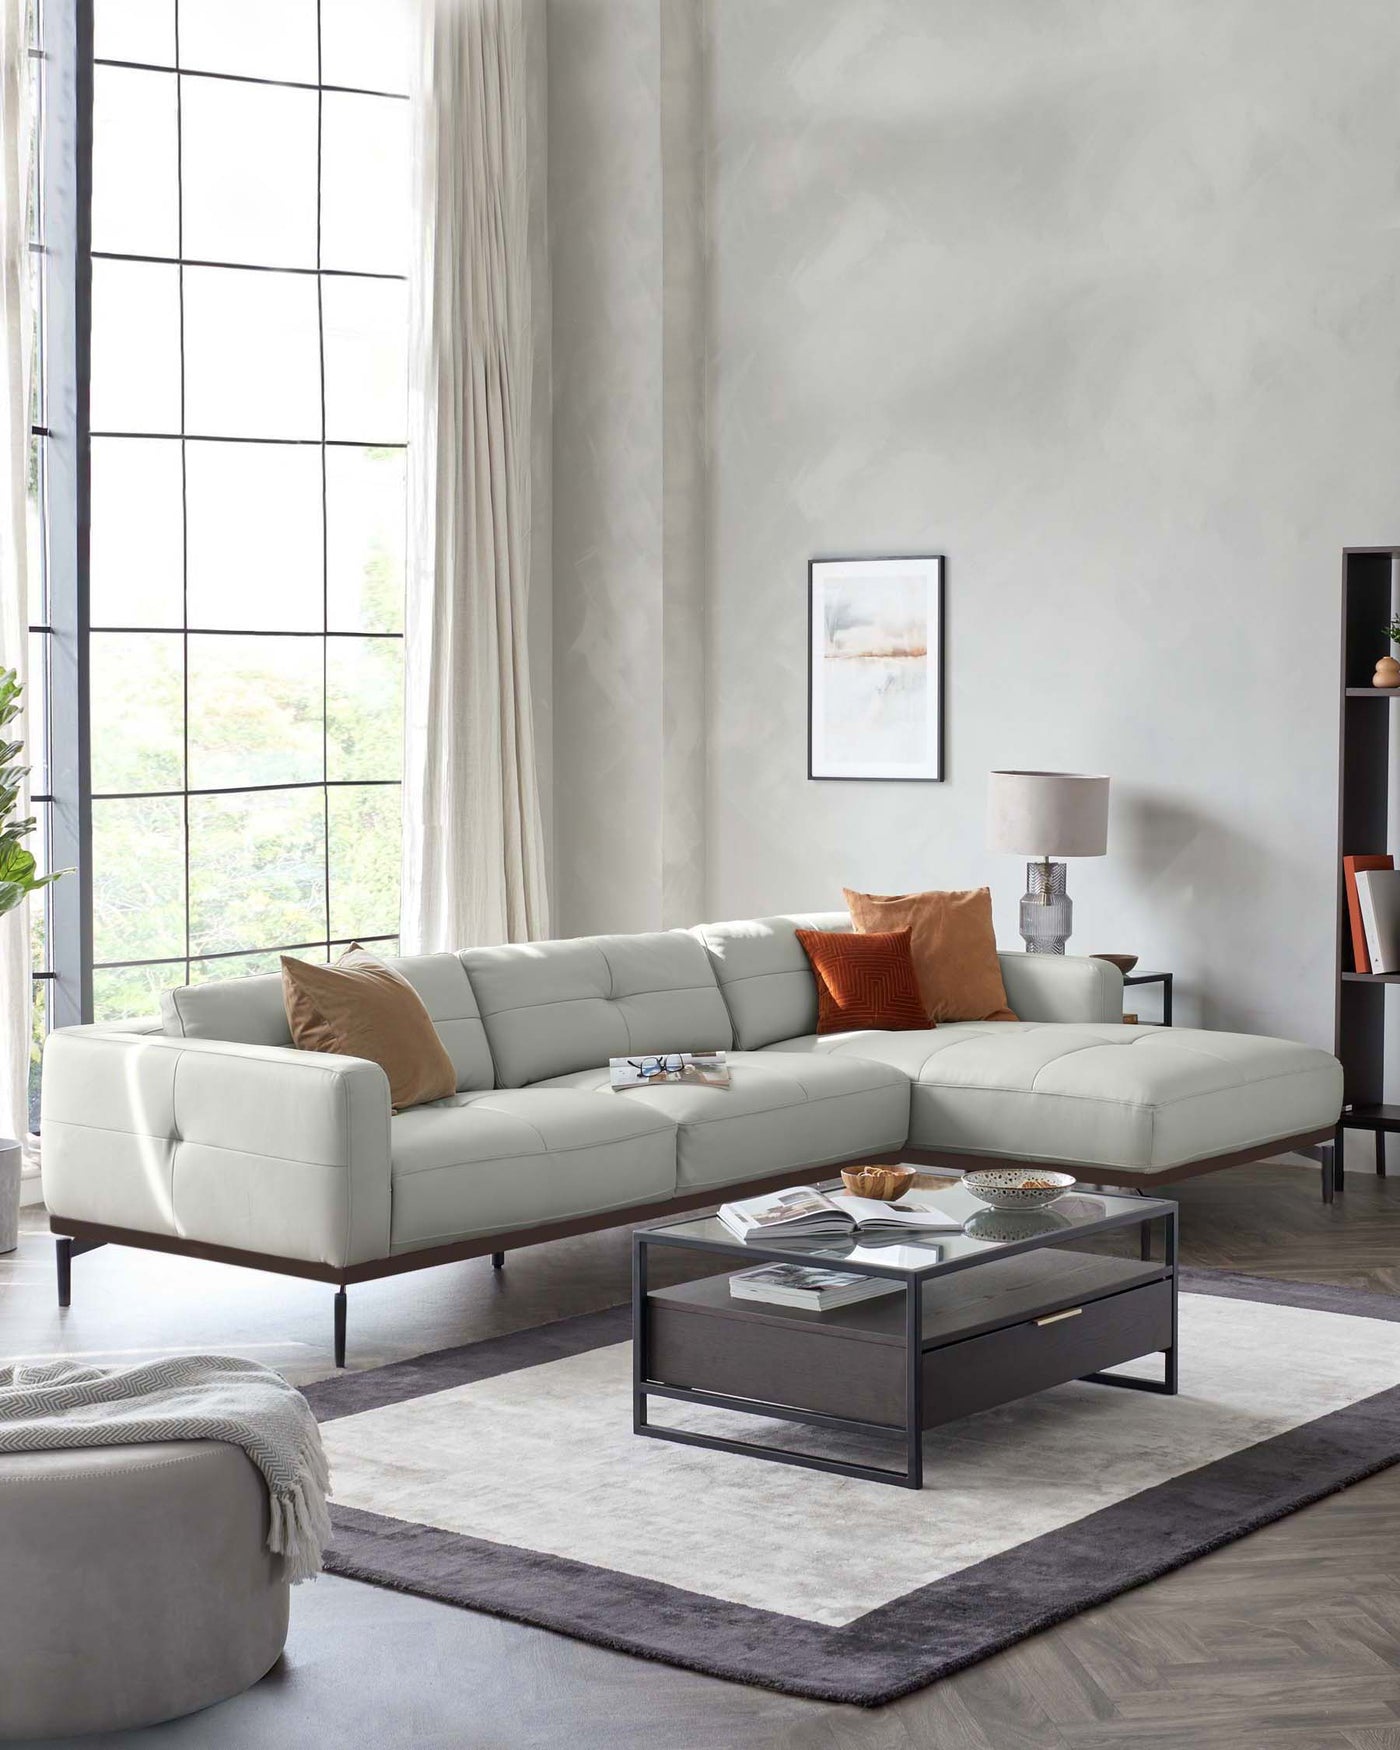 Elegant light grey L-shaped sectional sofa with plush cushioning and throw pillows in earth tones, paired with a modern rectangular coffee table with a black metal frame and dark wood top. The ensemble is accented by a soft grey ottoman, all arranged on a two-tone area rug over a herringbone-patterned floor.